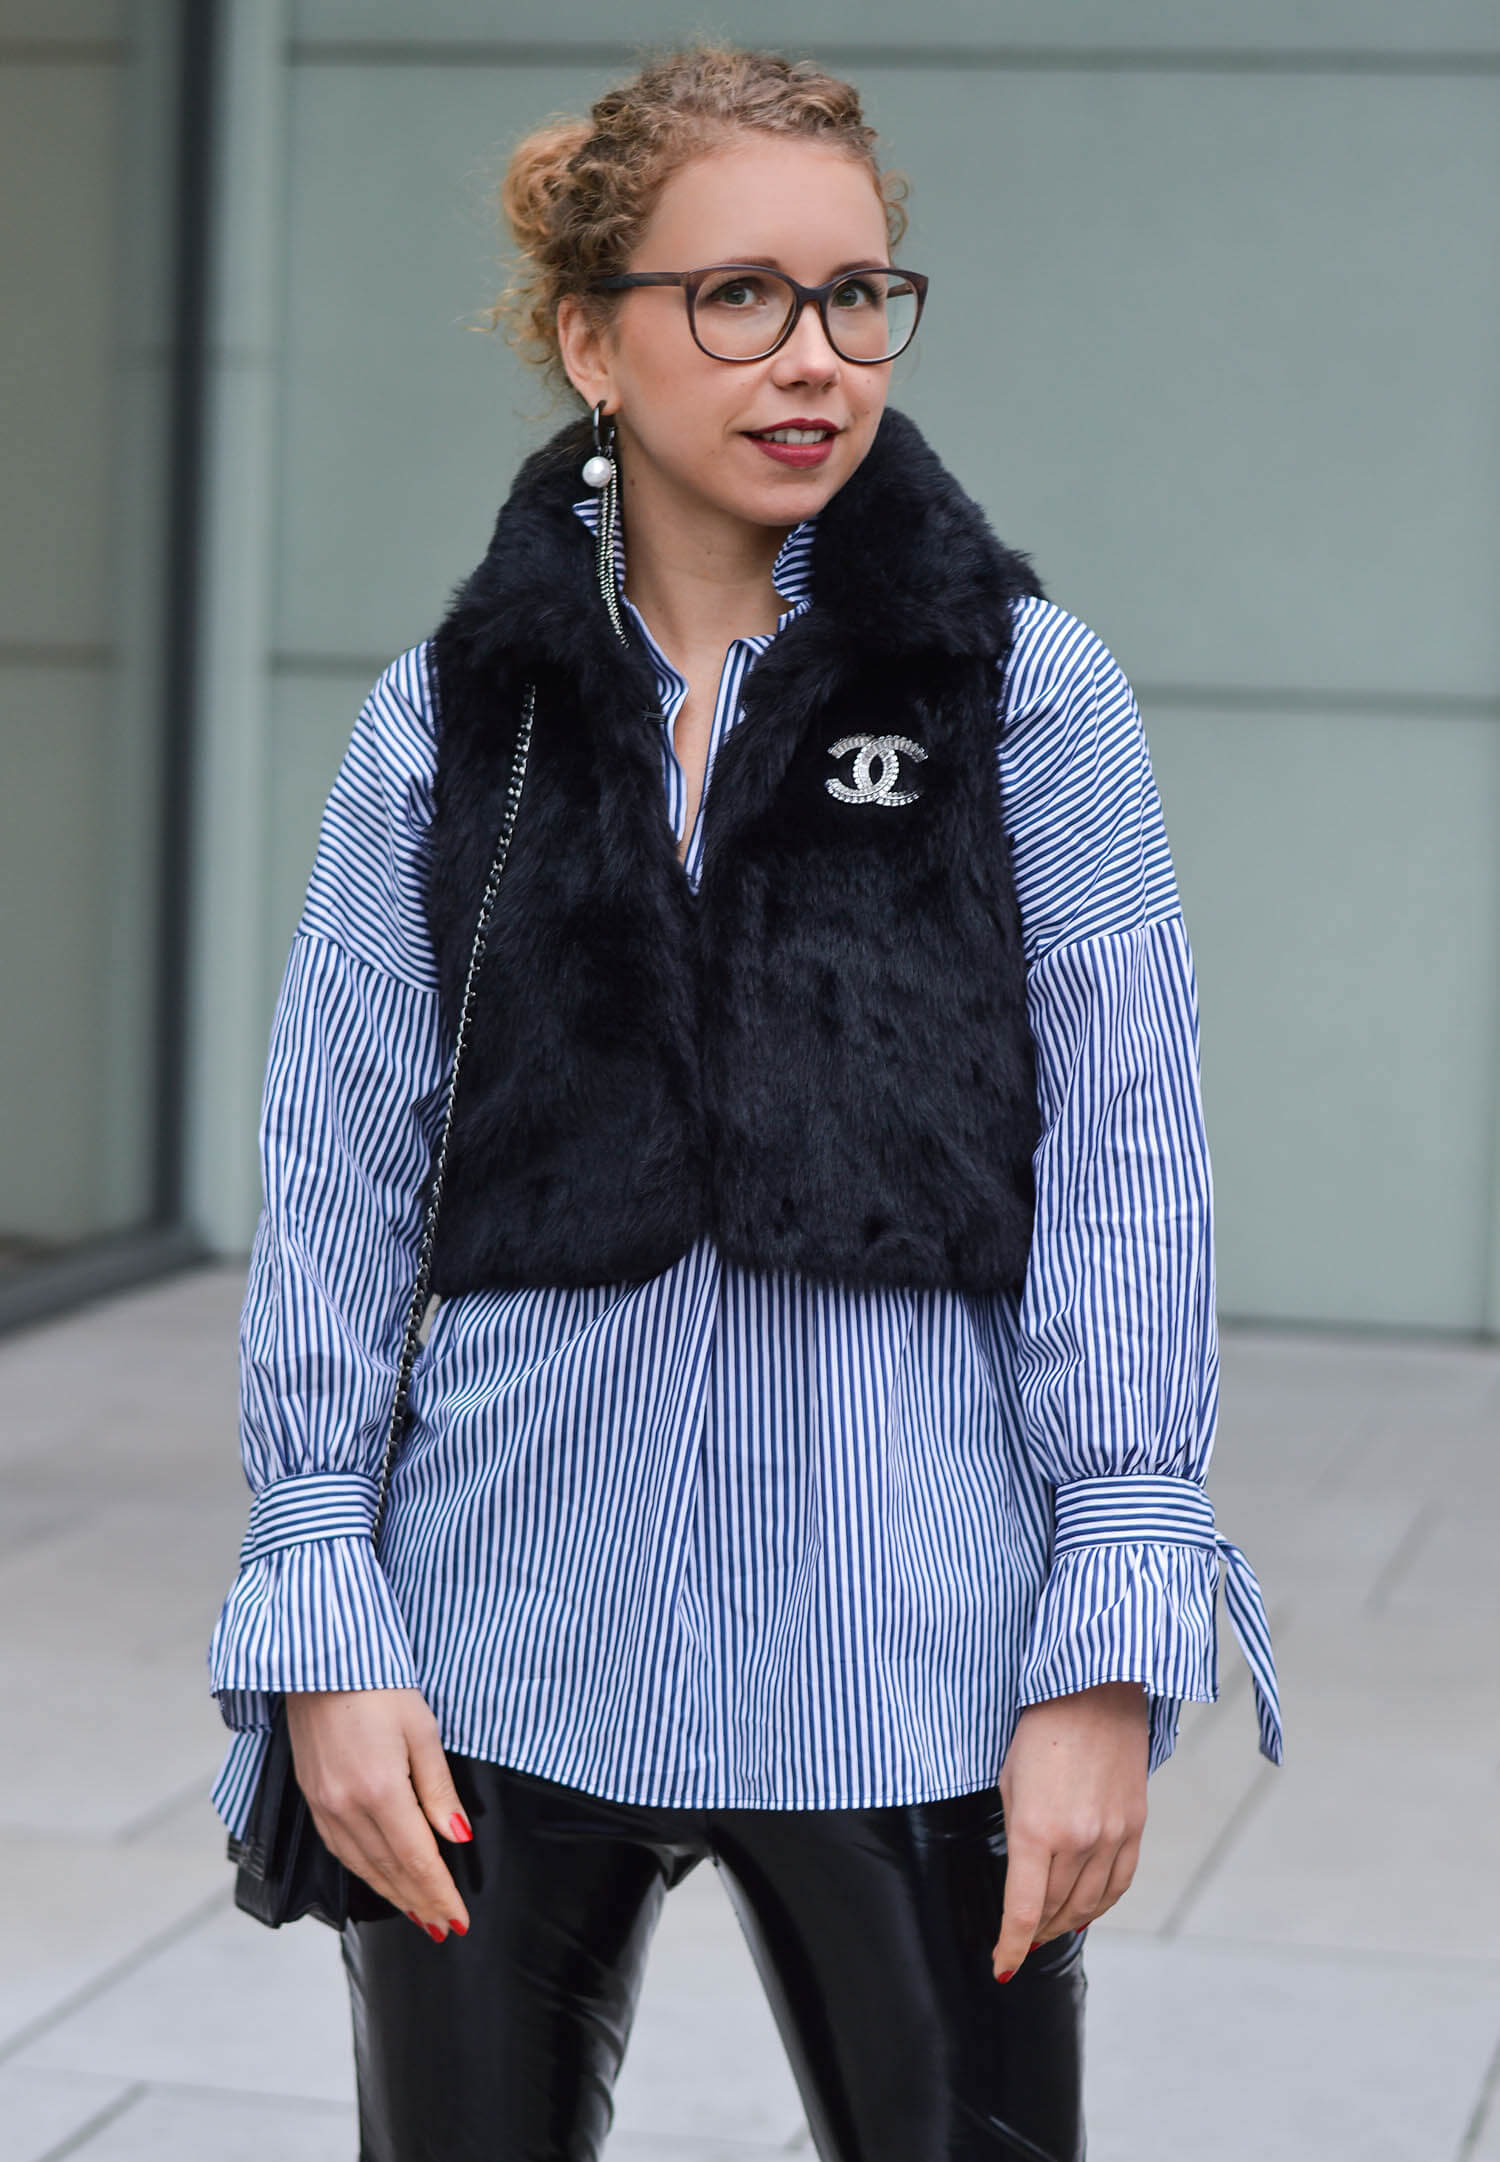 Kationette-fashionblogger-nrw-Outfit-Woolcoat-Striped-Blouse-Fake-Fur-Vest-and-Vinyl-Pants